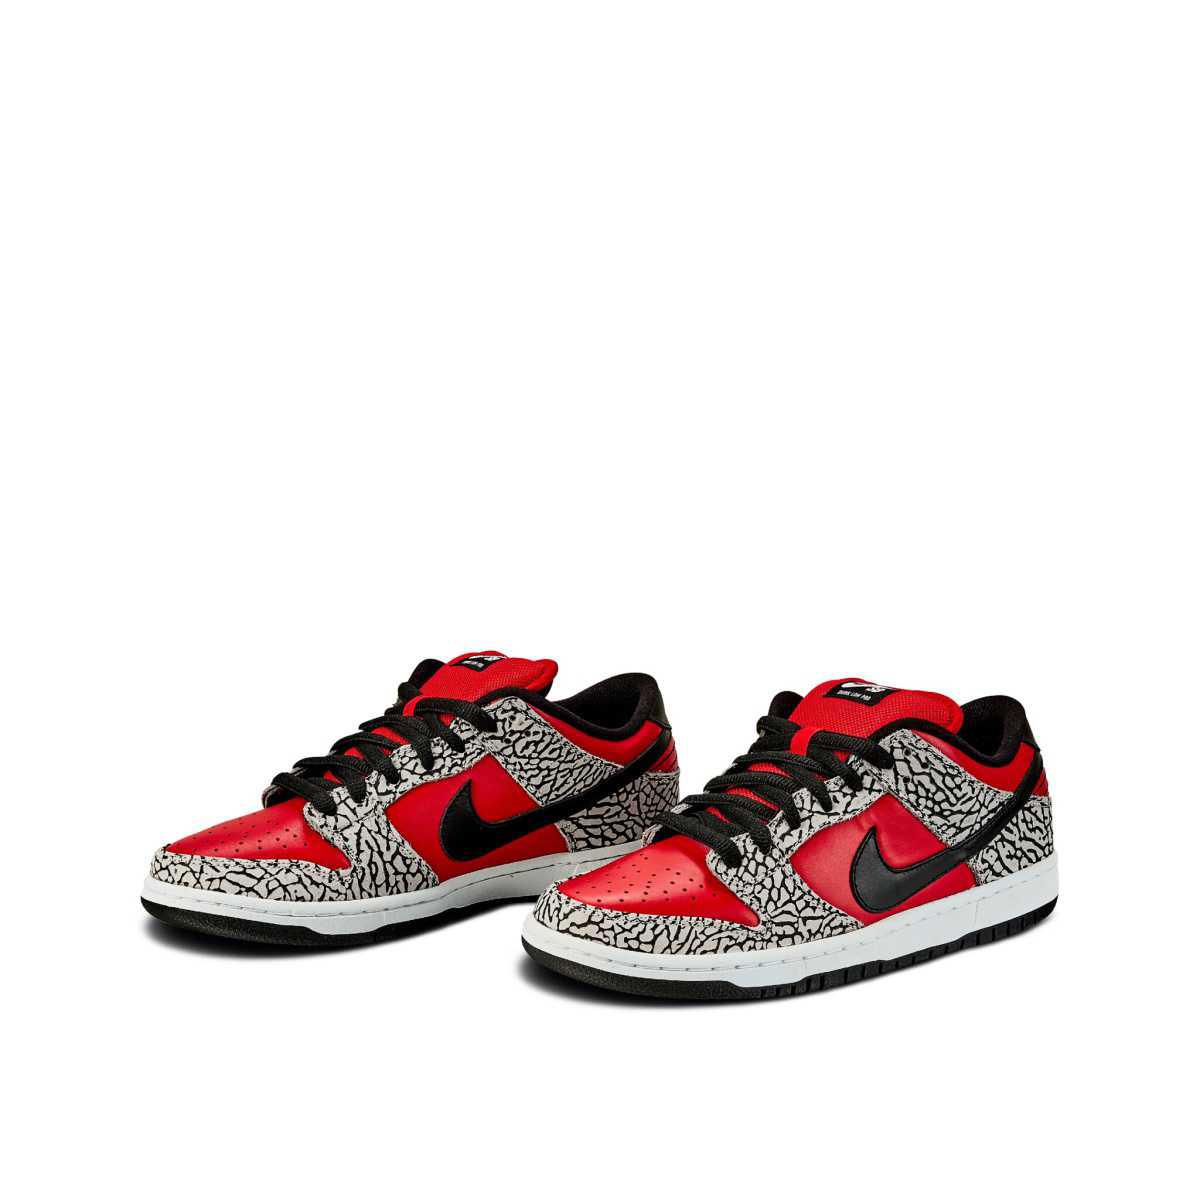 NIKE SB Dunk Low x Supreme Red Cement